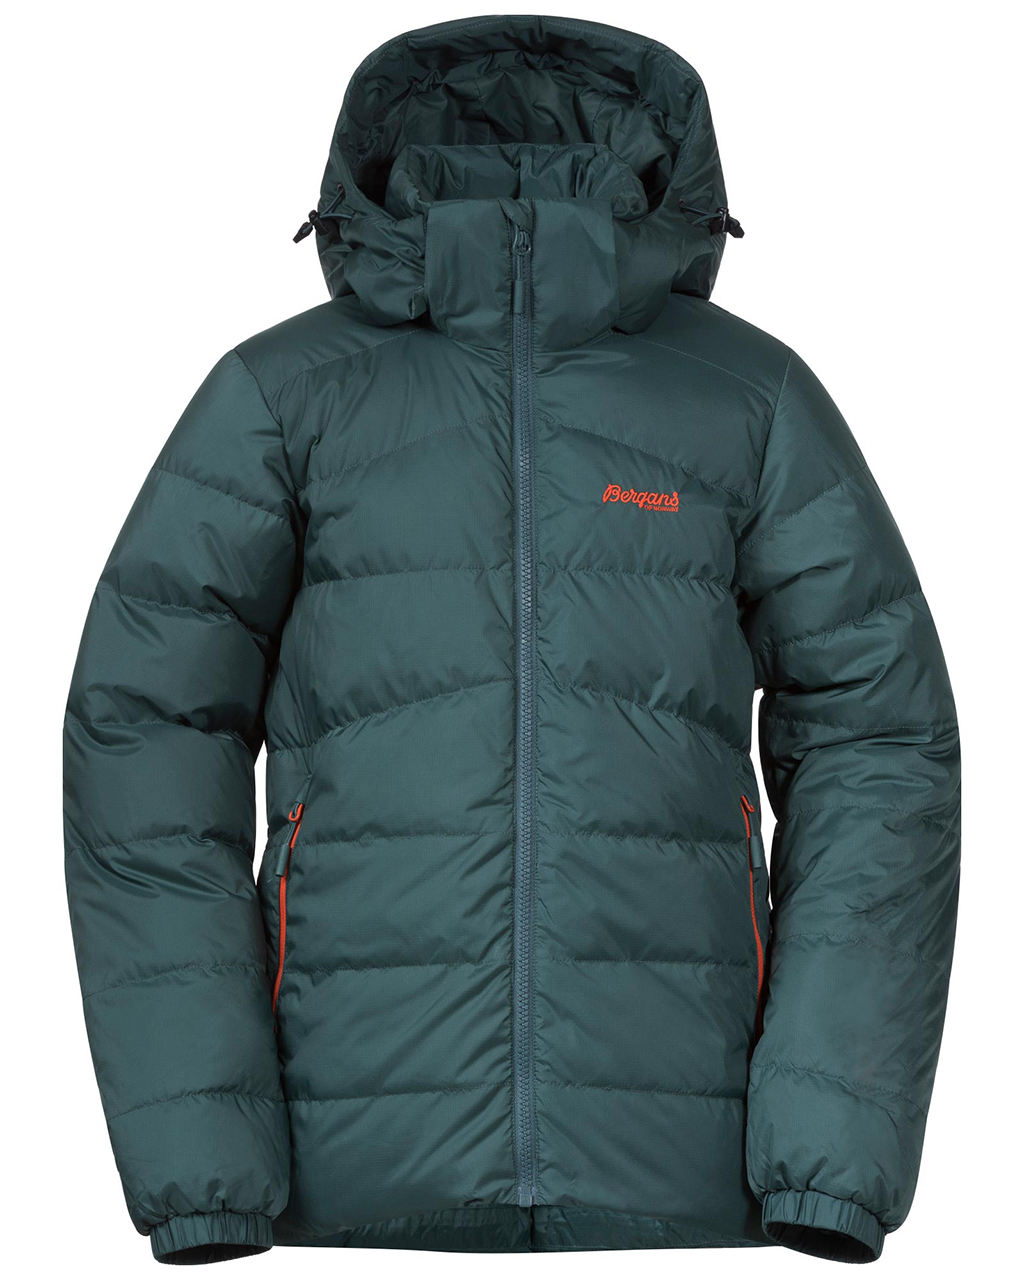 Bergans Røros Down Youth Jacket Forestfrost/Br Magma (Storlek 128)